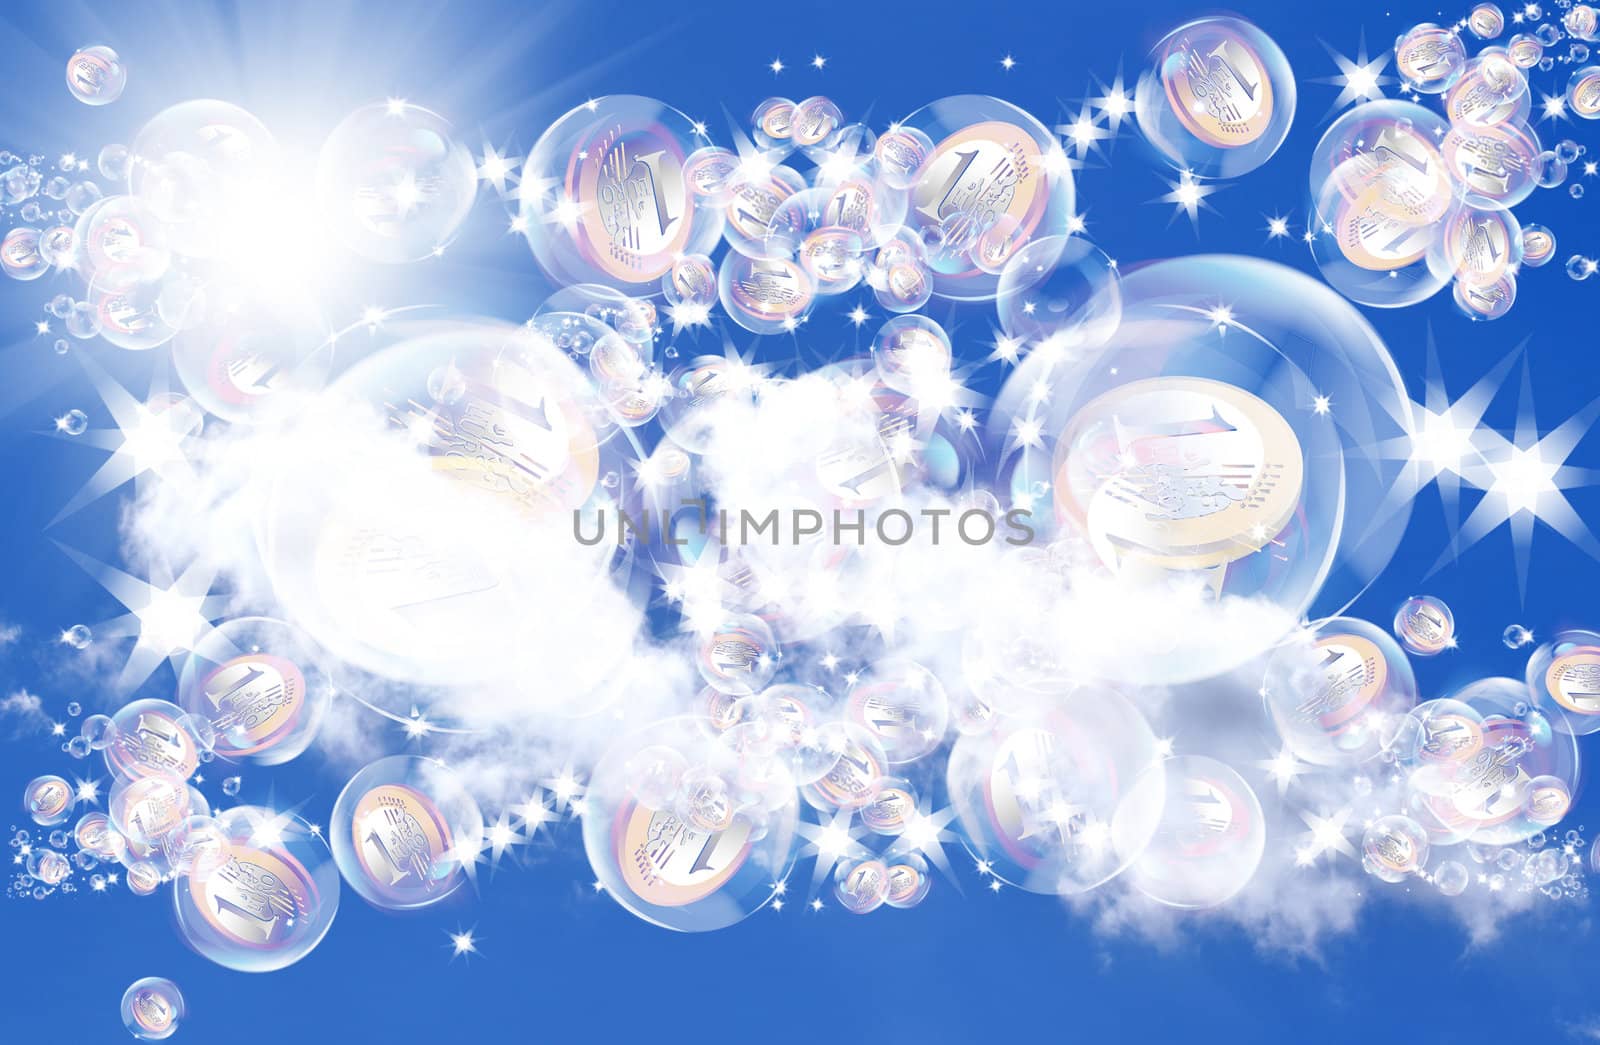 Pink dreams in soap bubbles about riches and financial profit